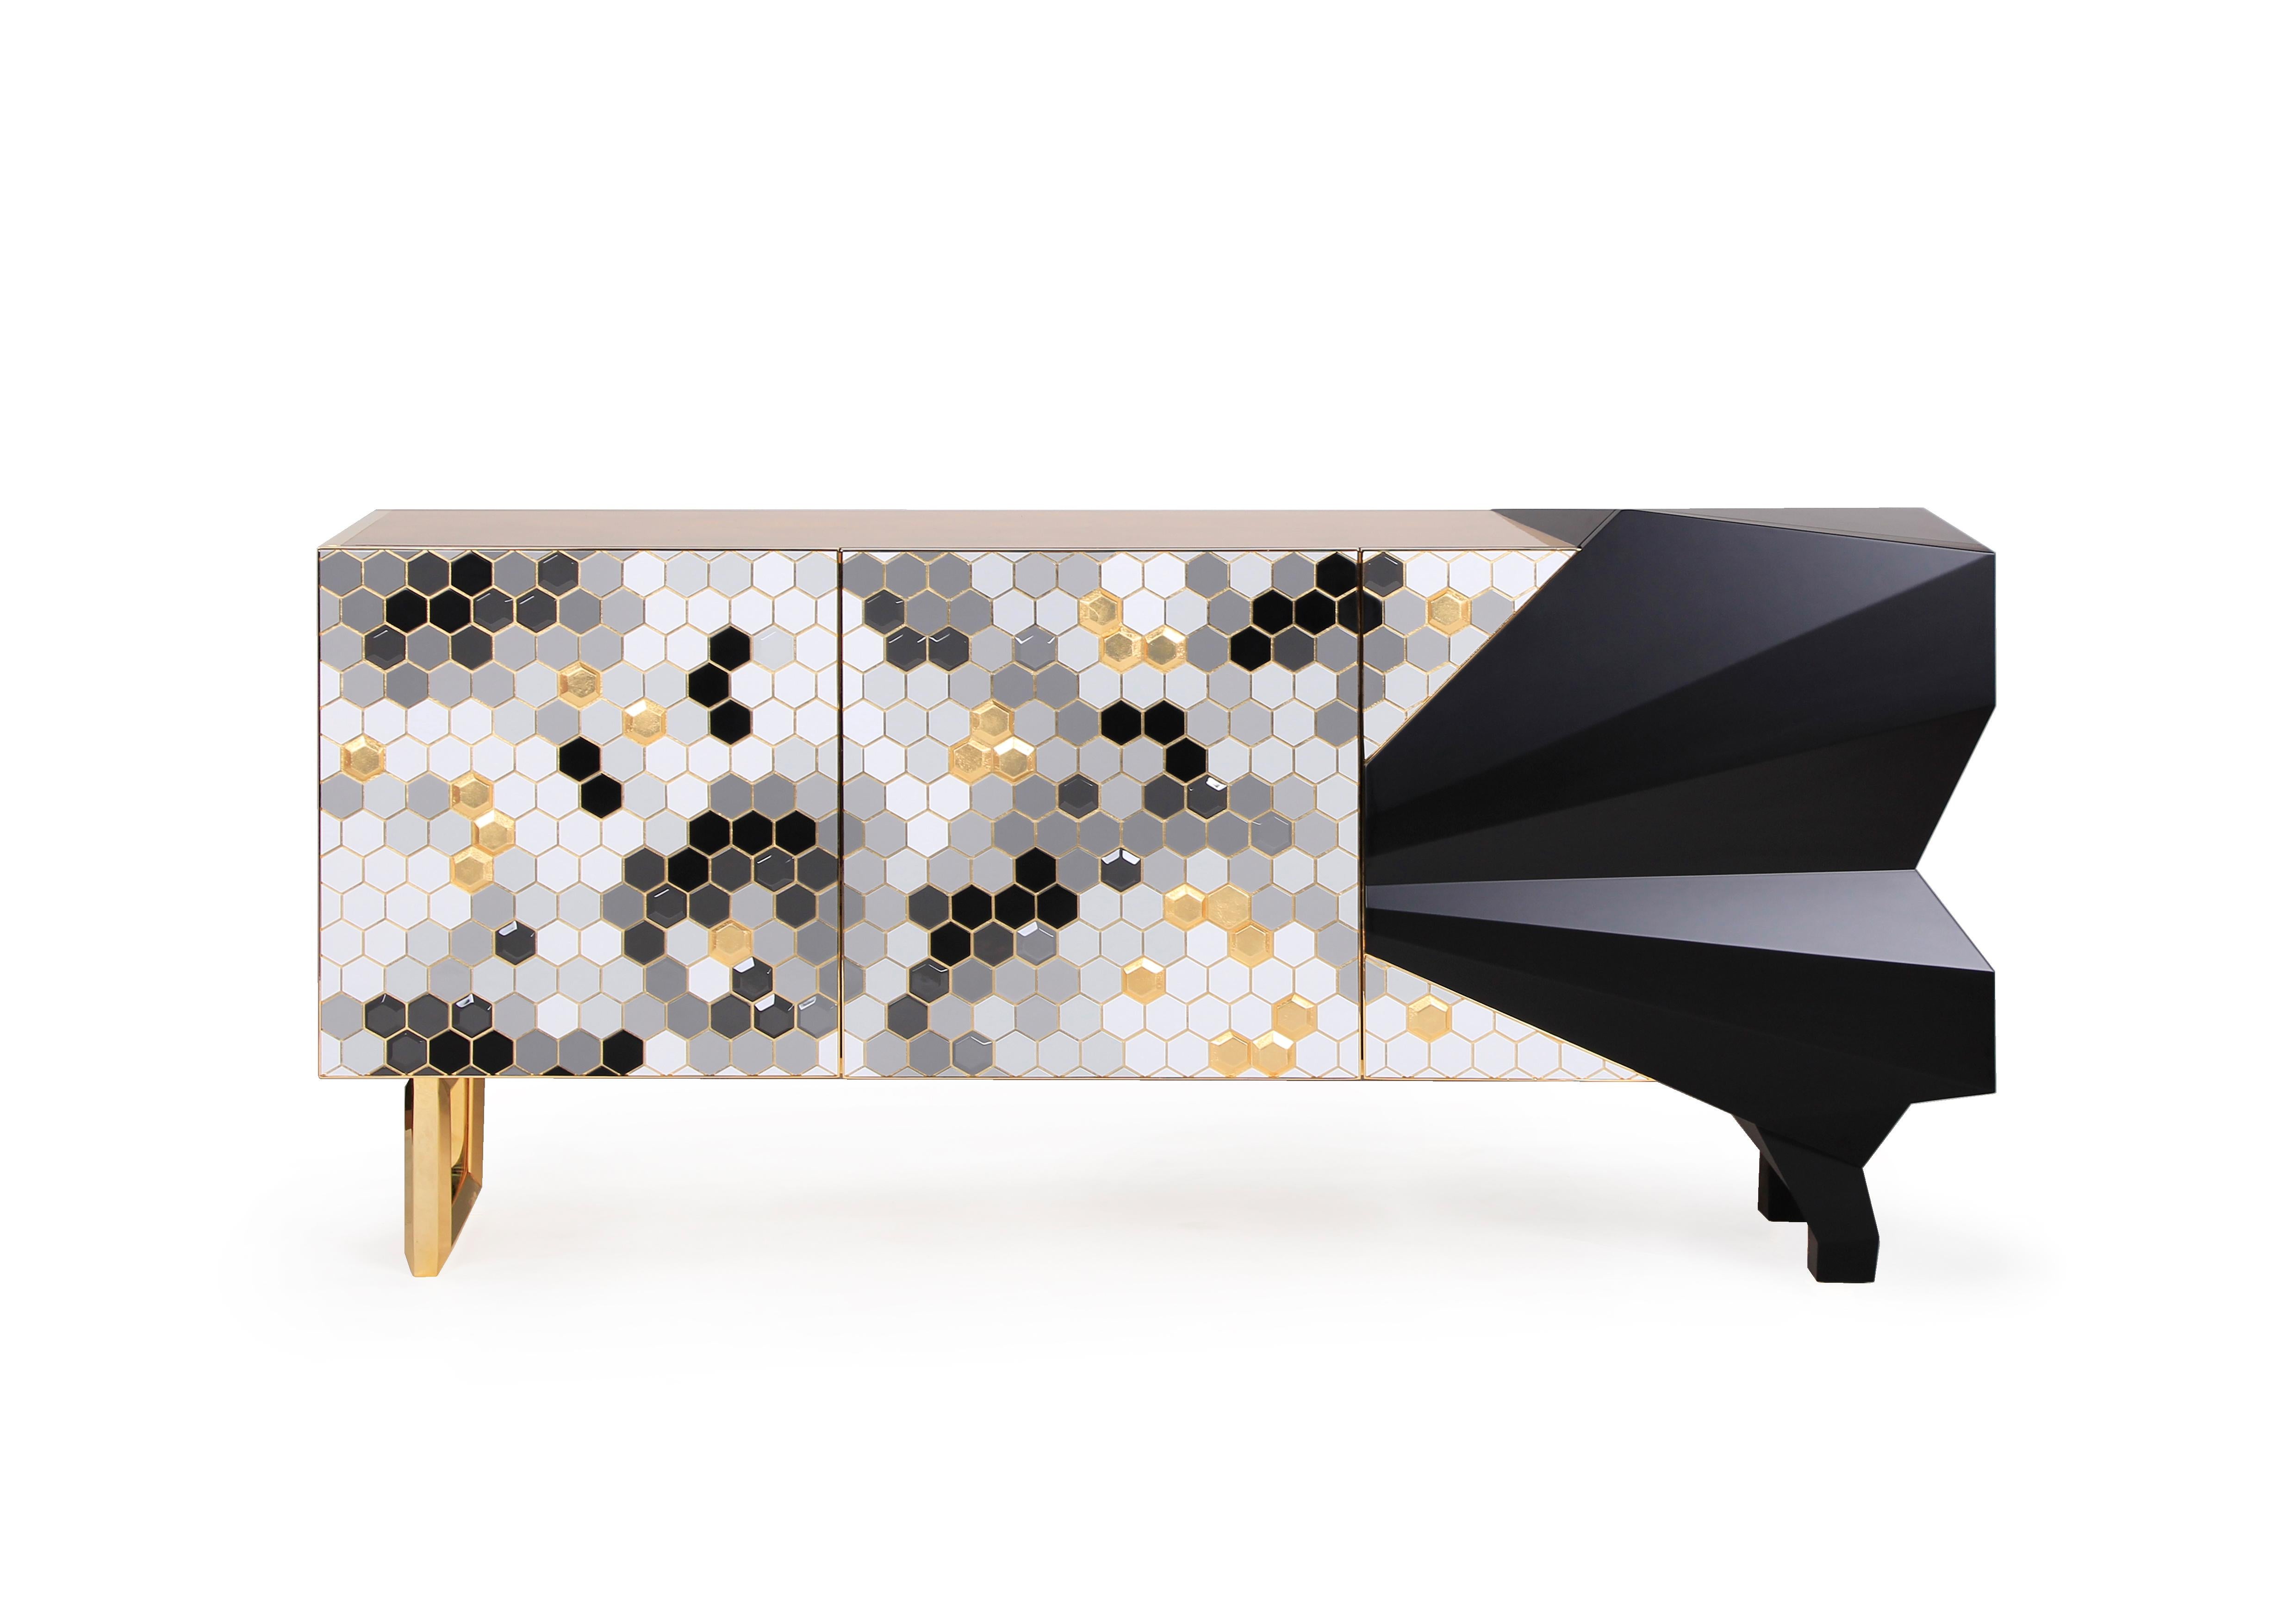 Honeycomb sideboard, Royal Stranger
Dimensions: 95 x 201 x 60 cm
Materials: Black pearl color combination with gold leaf and stainless steel coated in brass.

Inspired by one of the most intrinsic forms of nature, this sideboard transforms your